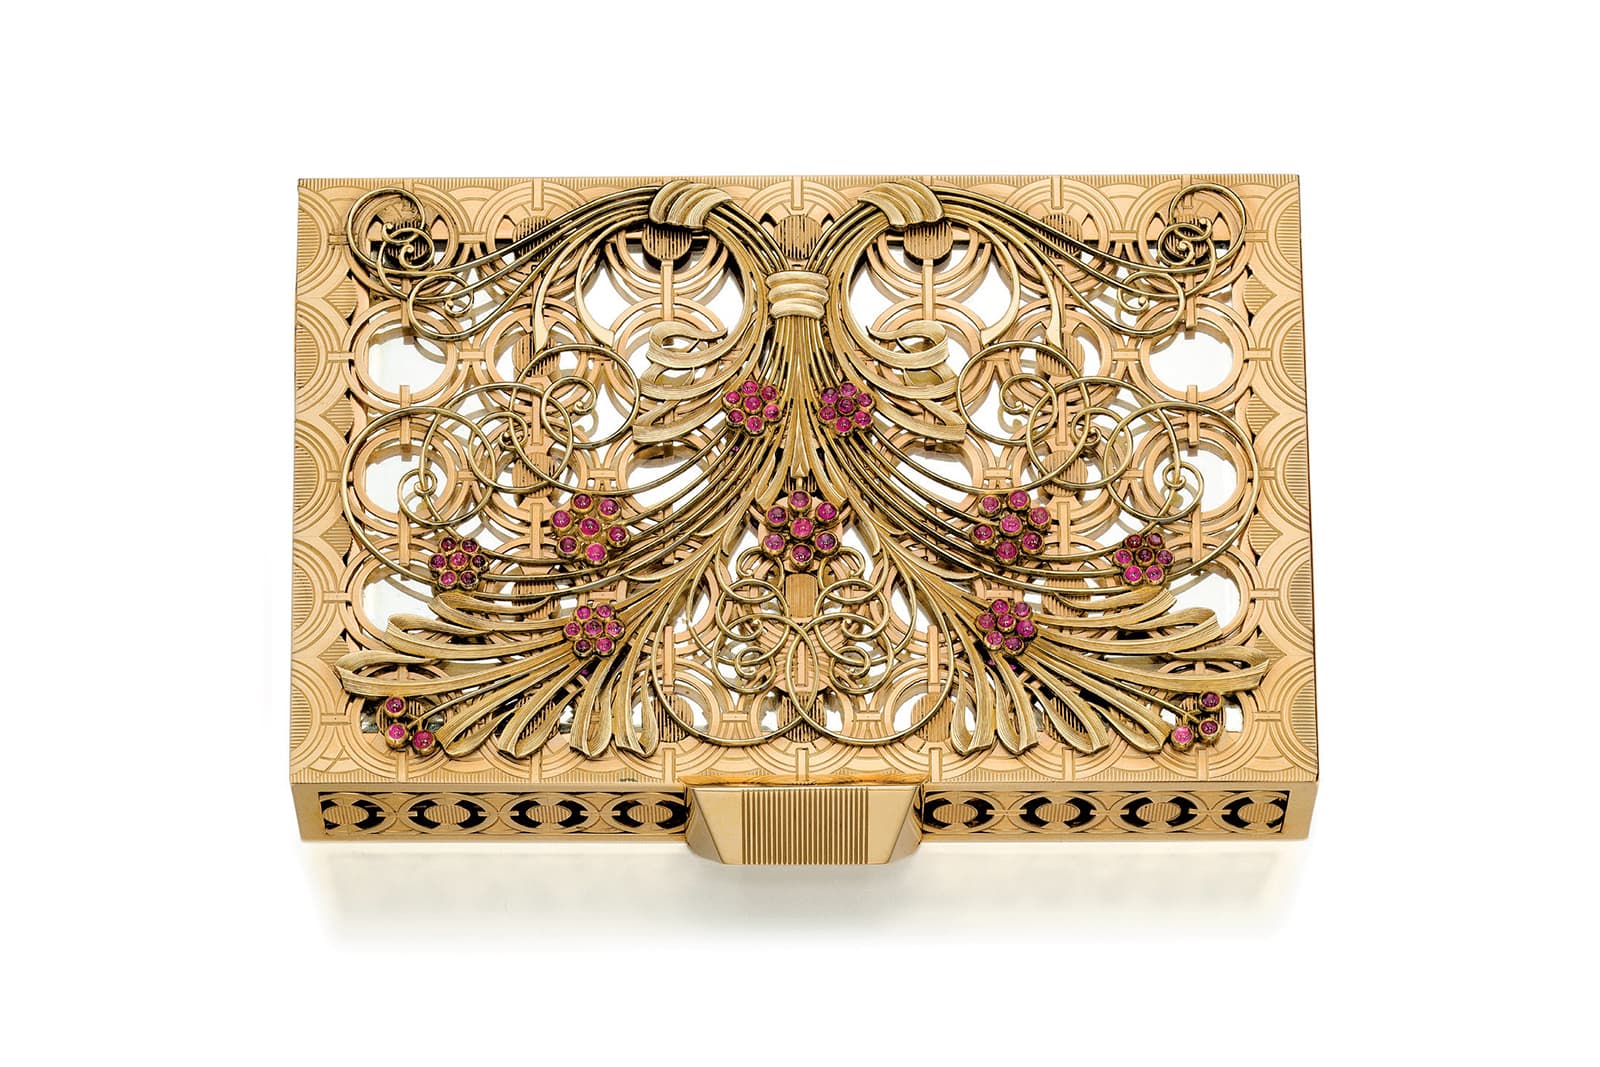 A History of the Vanity Case from Cartier to Boucheron